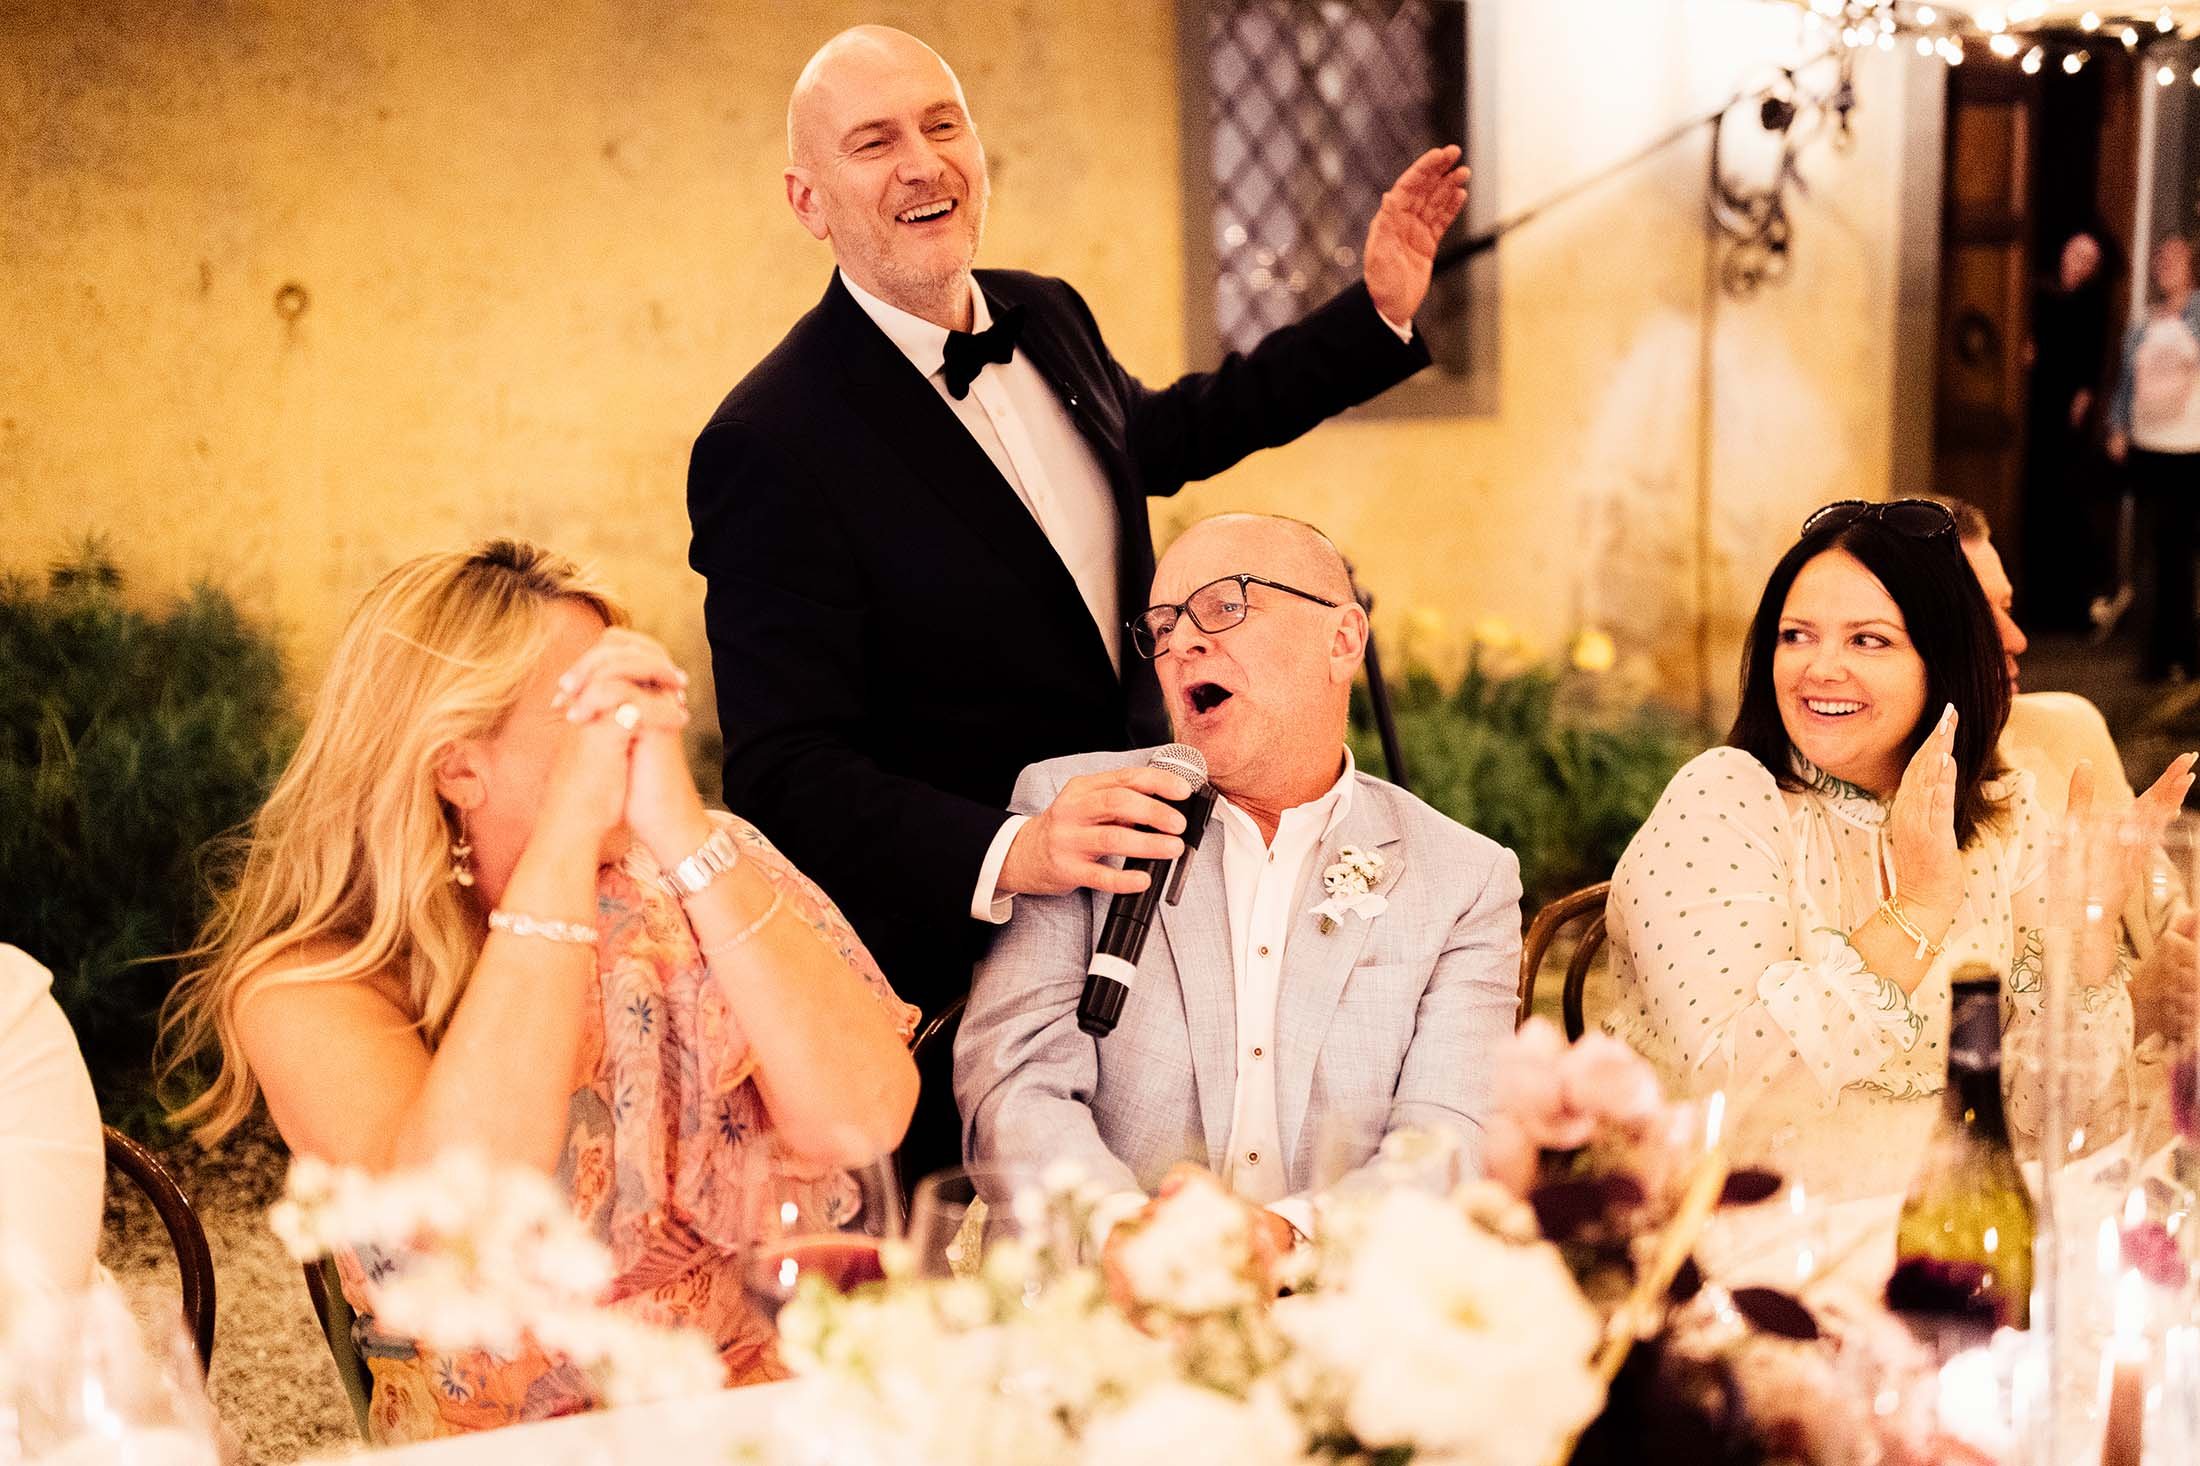 Italian tenor gets guest to sing along during wedding dinner at villa di ulignano